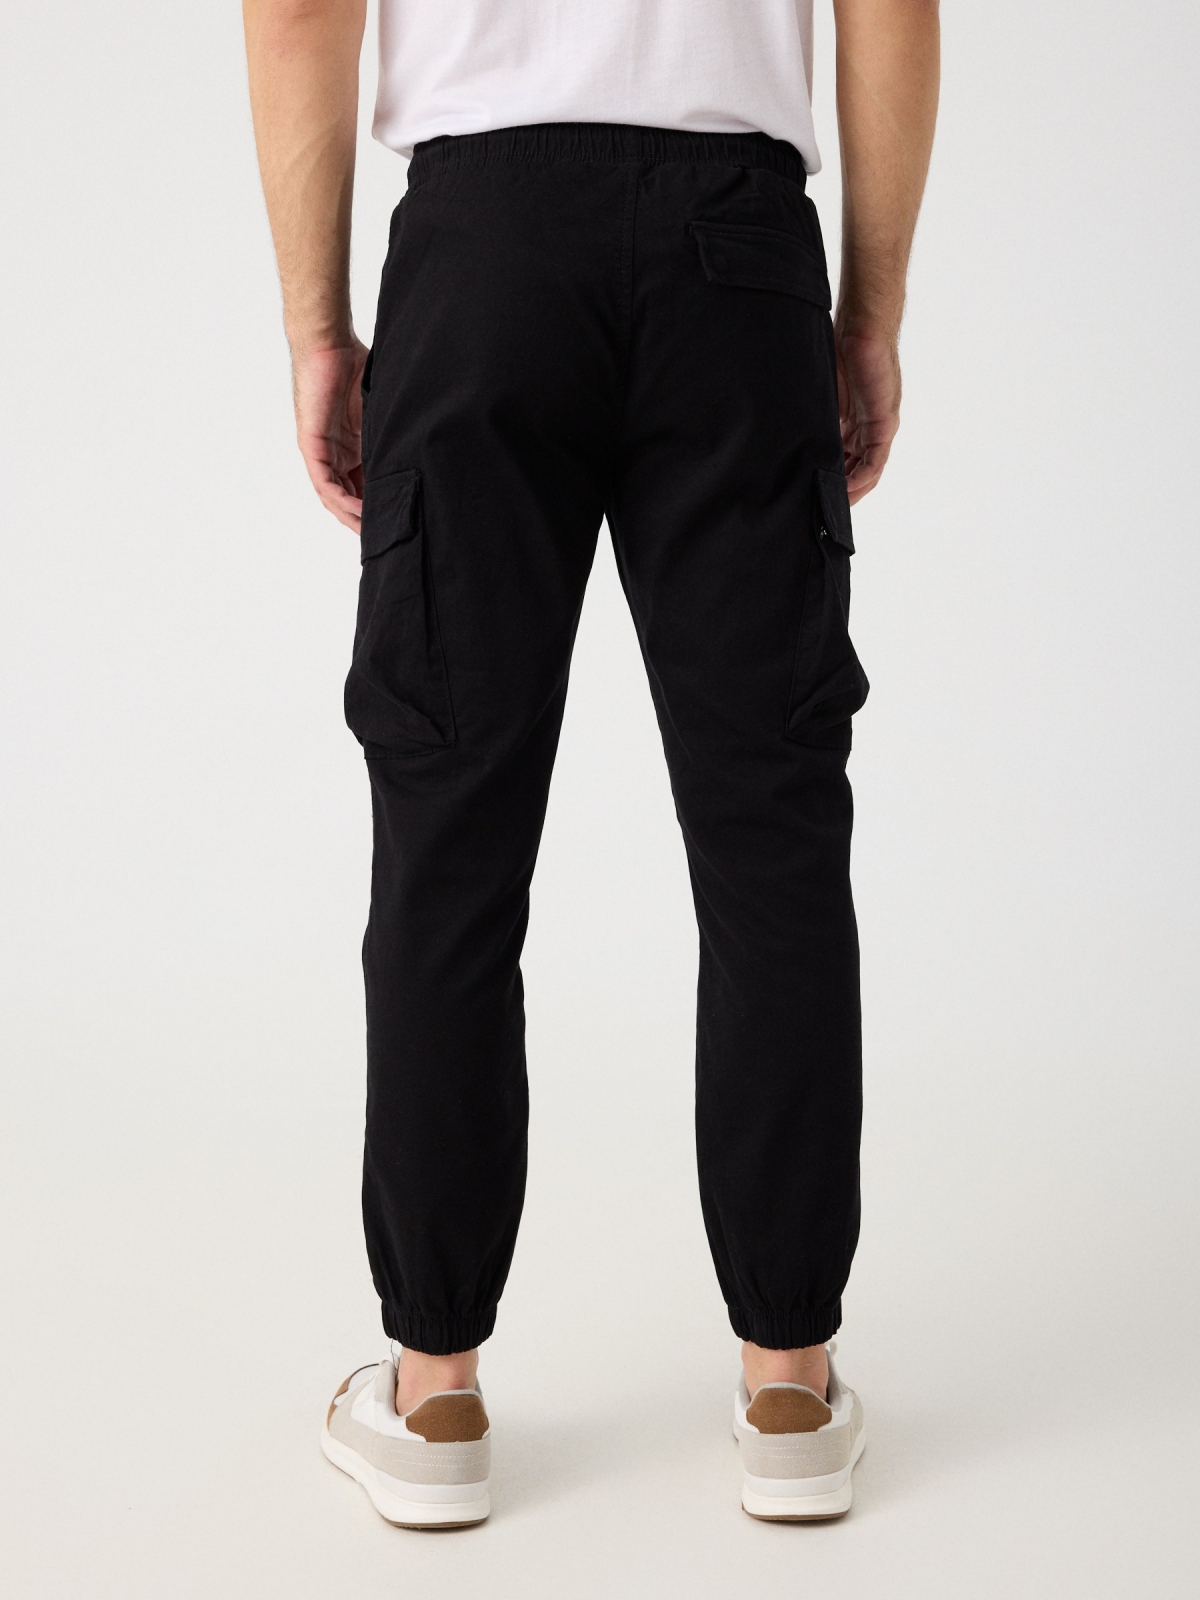 Adjustable cargo joggers black middle back view